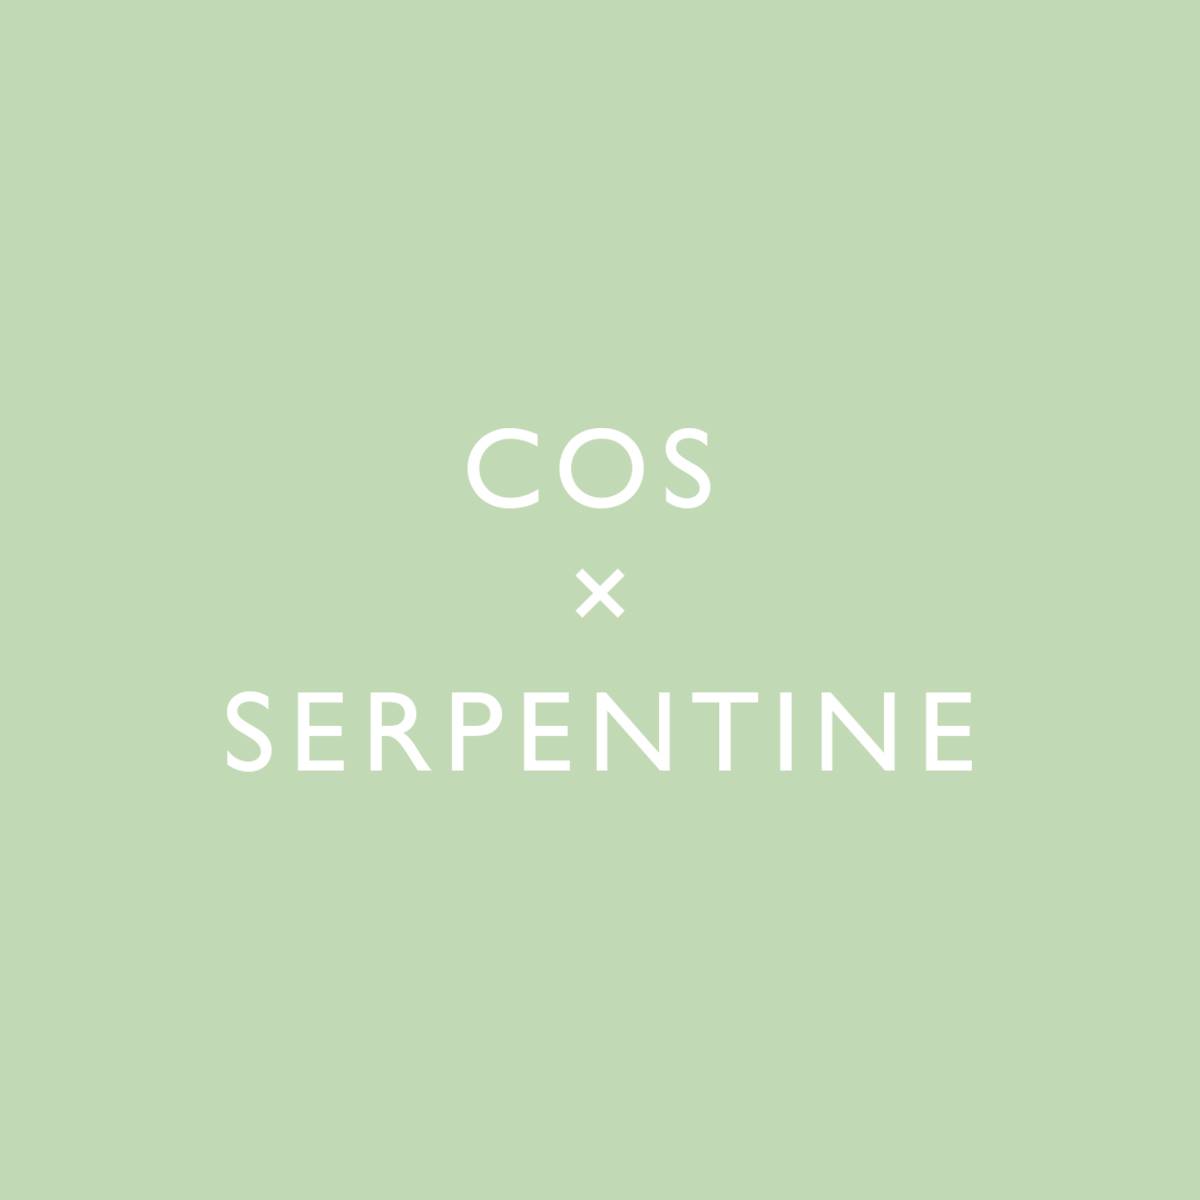 For the seventh consecutive year, we are proud to support the Serpentine’s annual programme. This year’s COS × Serpentine Park Nights is a series of experimental and interdisciplinary evenings hosted at the Serpentine Pavilion, designed by architect, Junya Ishigami.  Serpentine Pavilion 